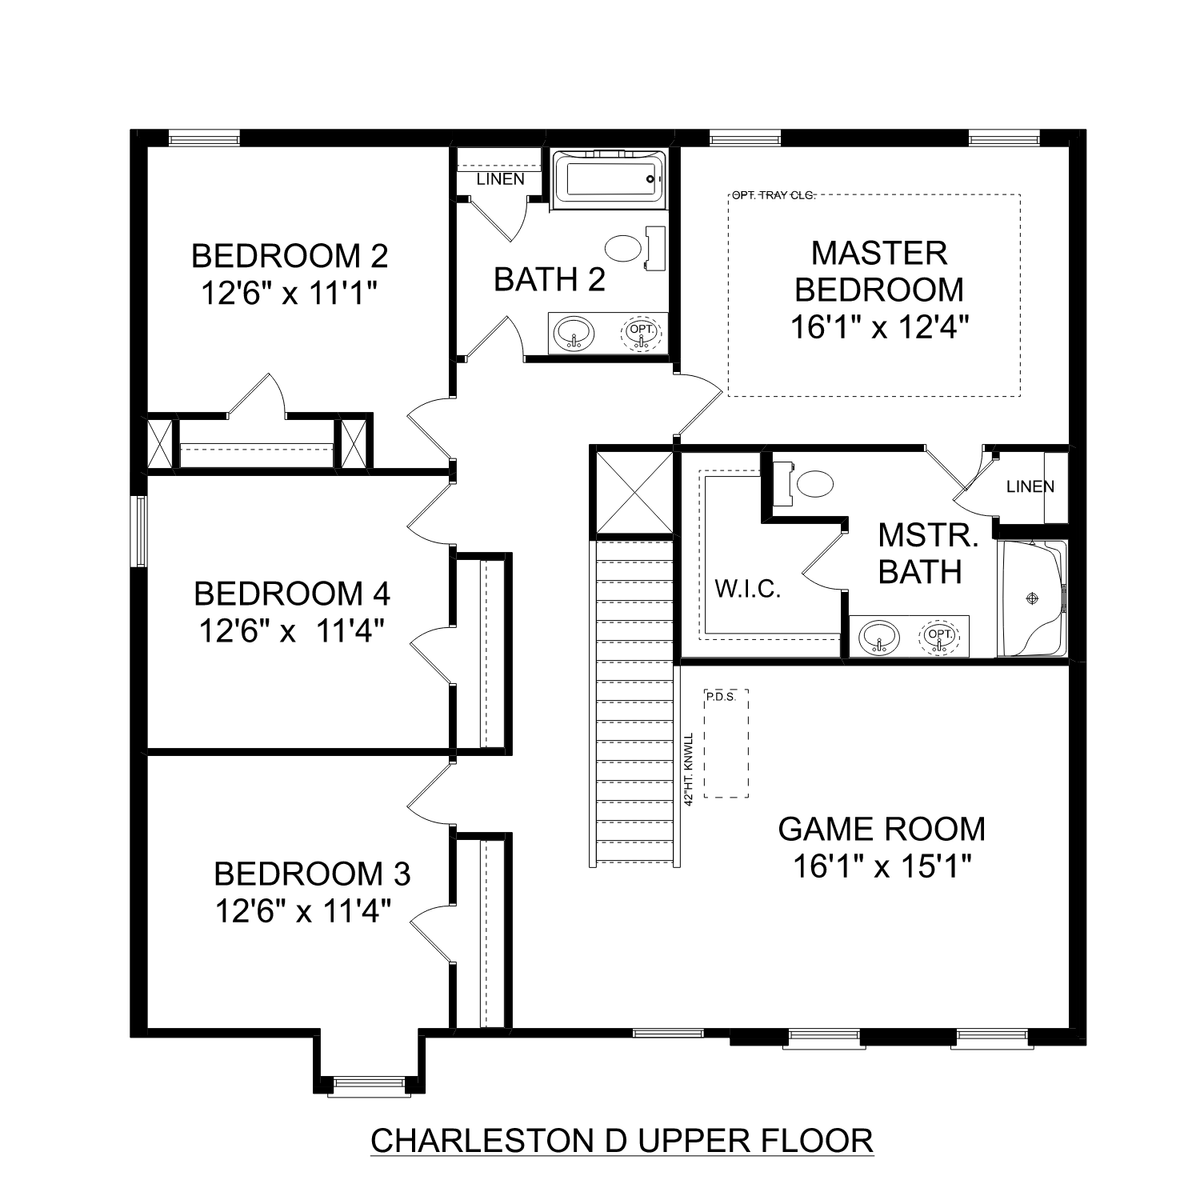 2 - The Charleston D floor plan layout for 1787 Stampede Circle in Davidson Homes' Pavilion community.